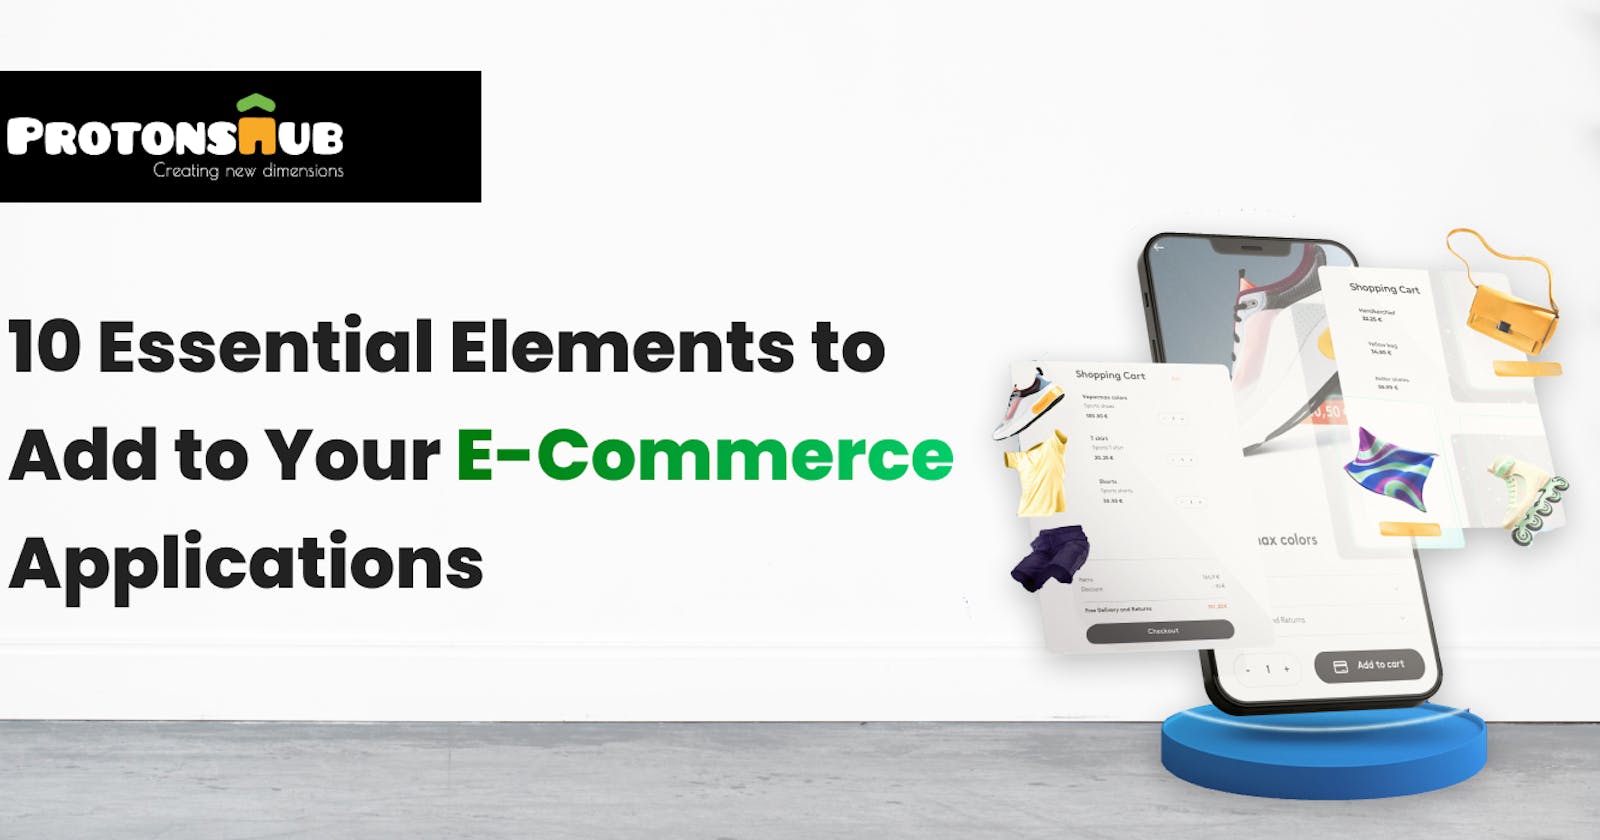 10 Essential Elements to Add to Your E-Commerce Applications